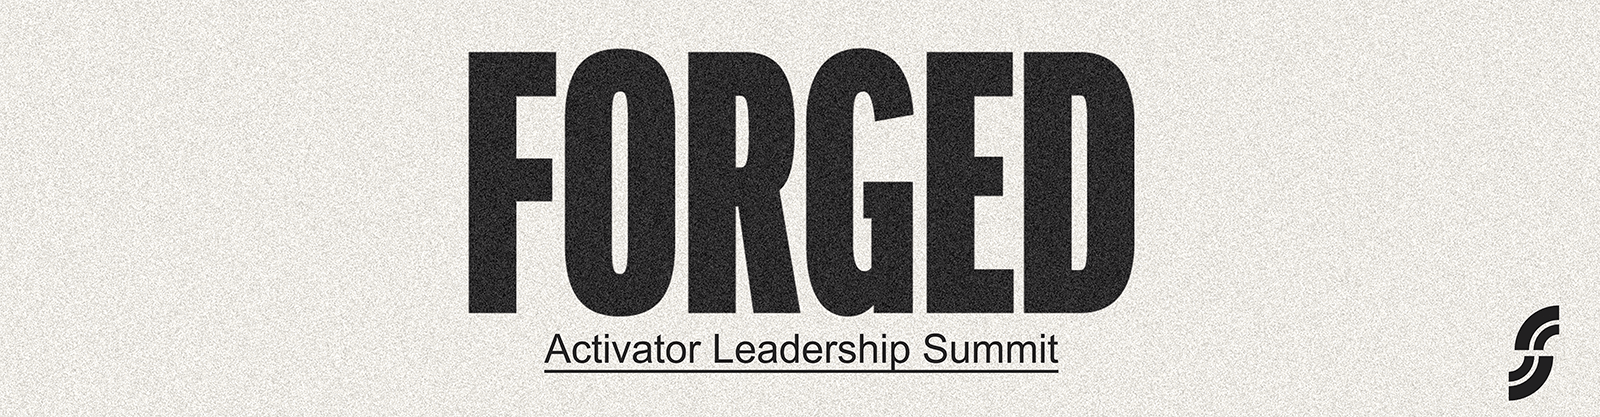 Forged_Leadership_Summit_Email_Header.png